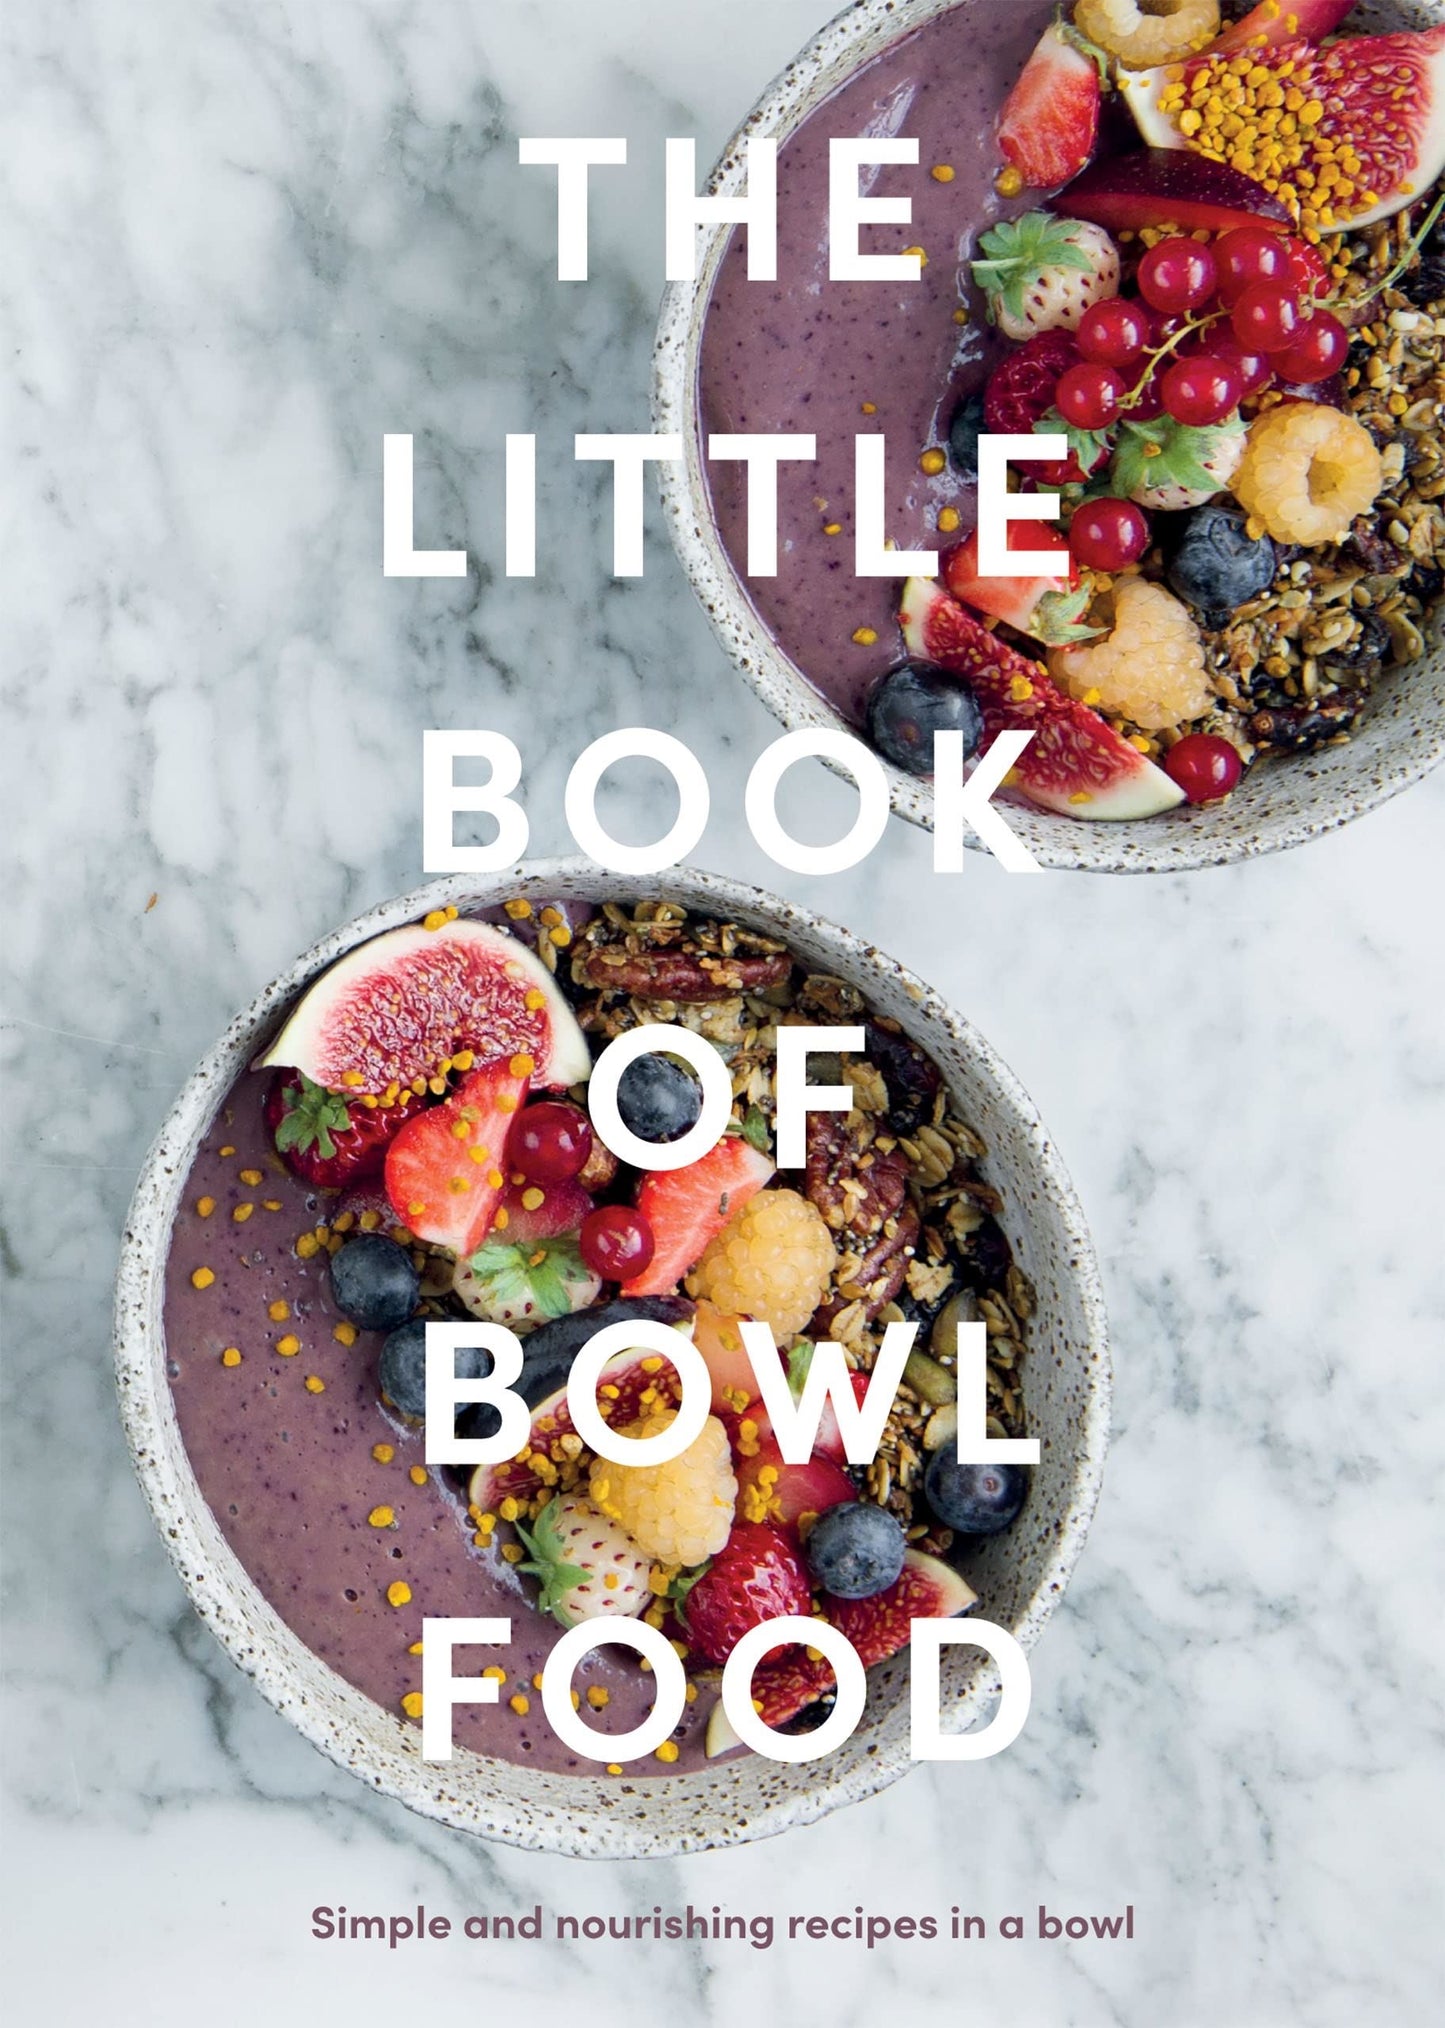 The Little Book of Bowl Food